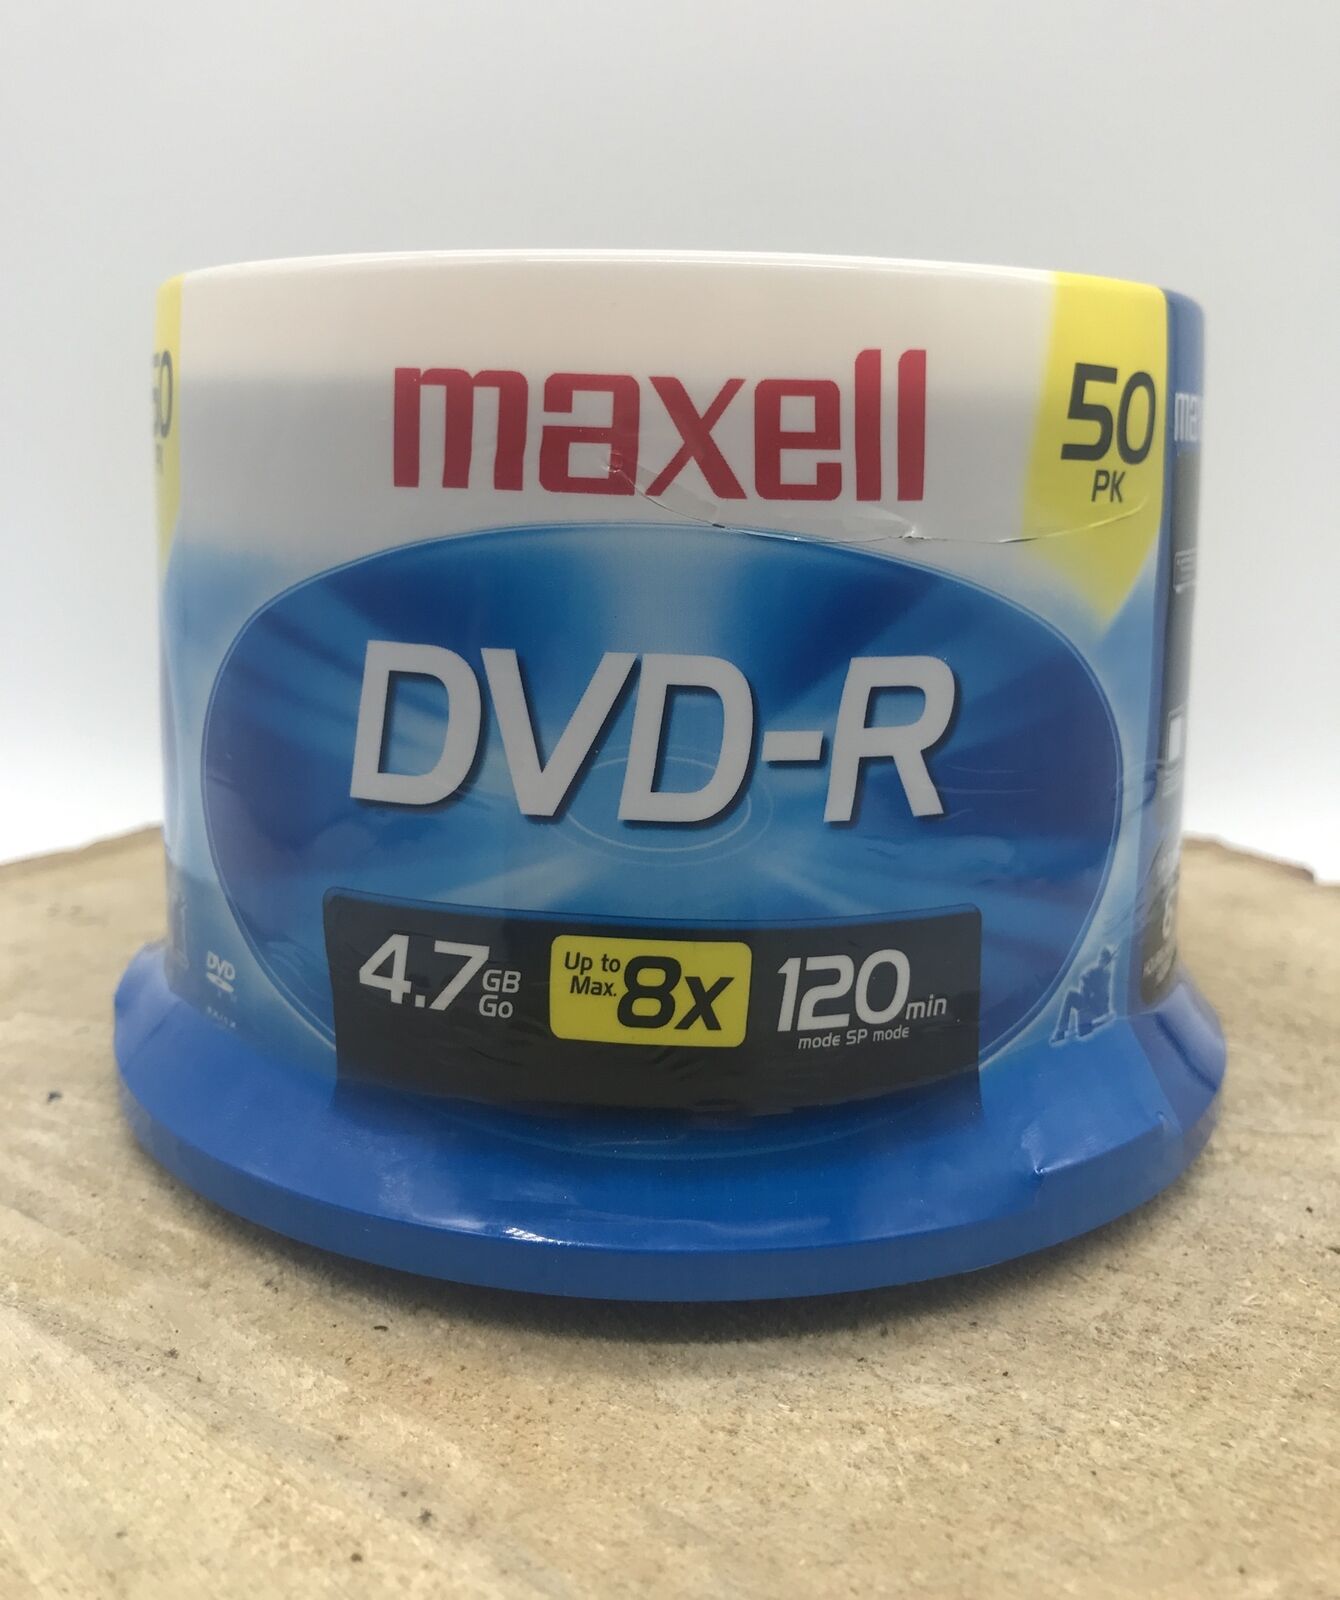 Maxell  DVD-R  4.7 GB 120 Minute 50 Pack  Video Recordable Discs FACTORY SEALED